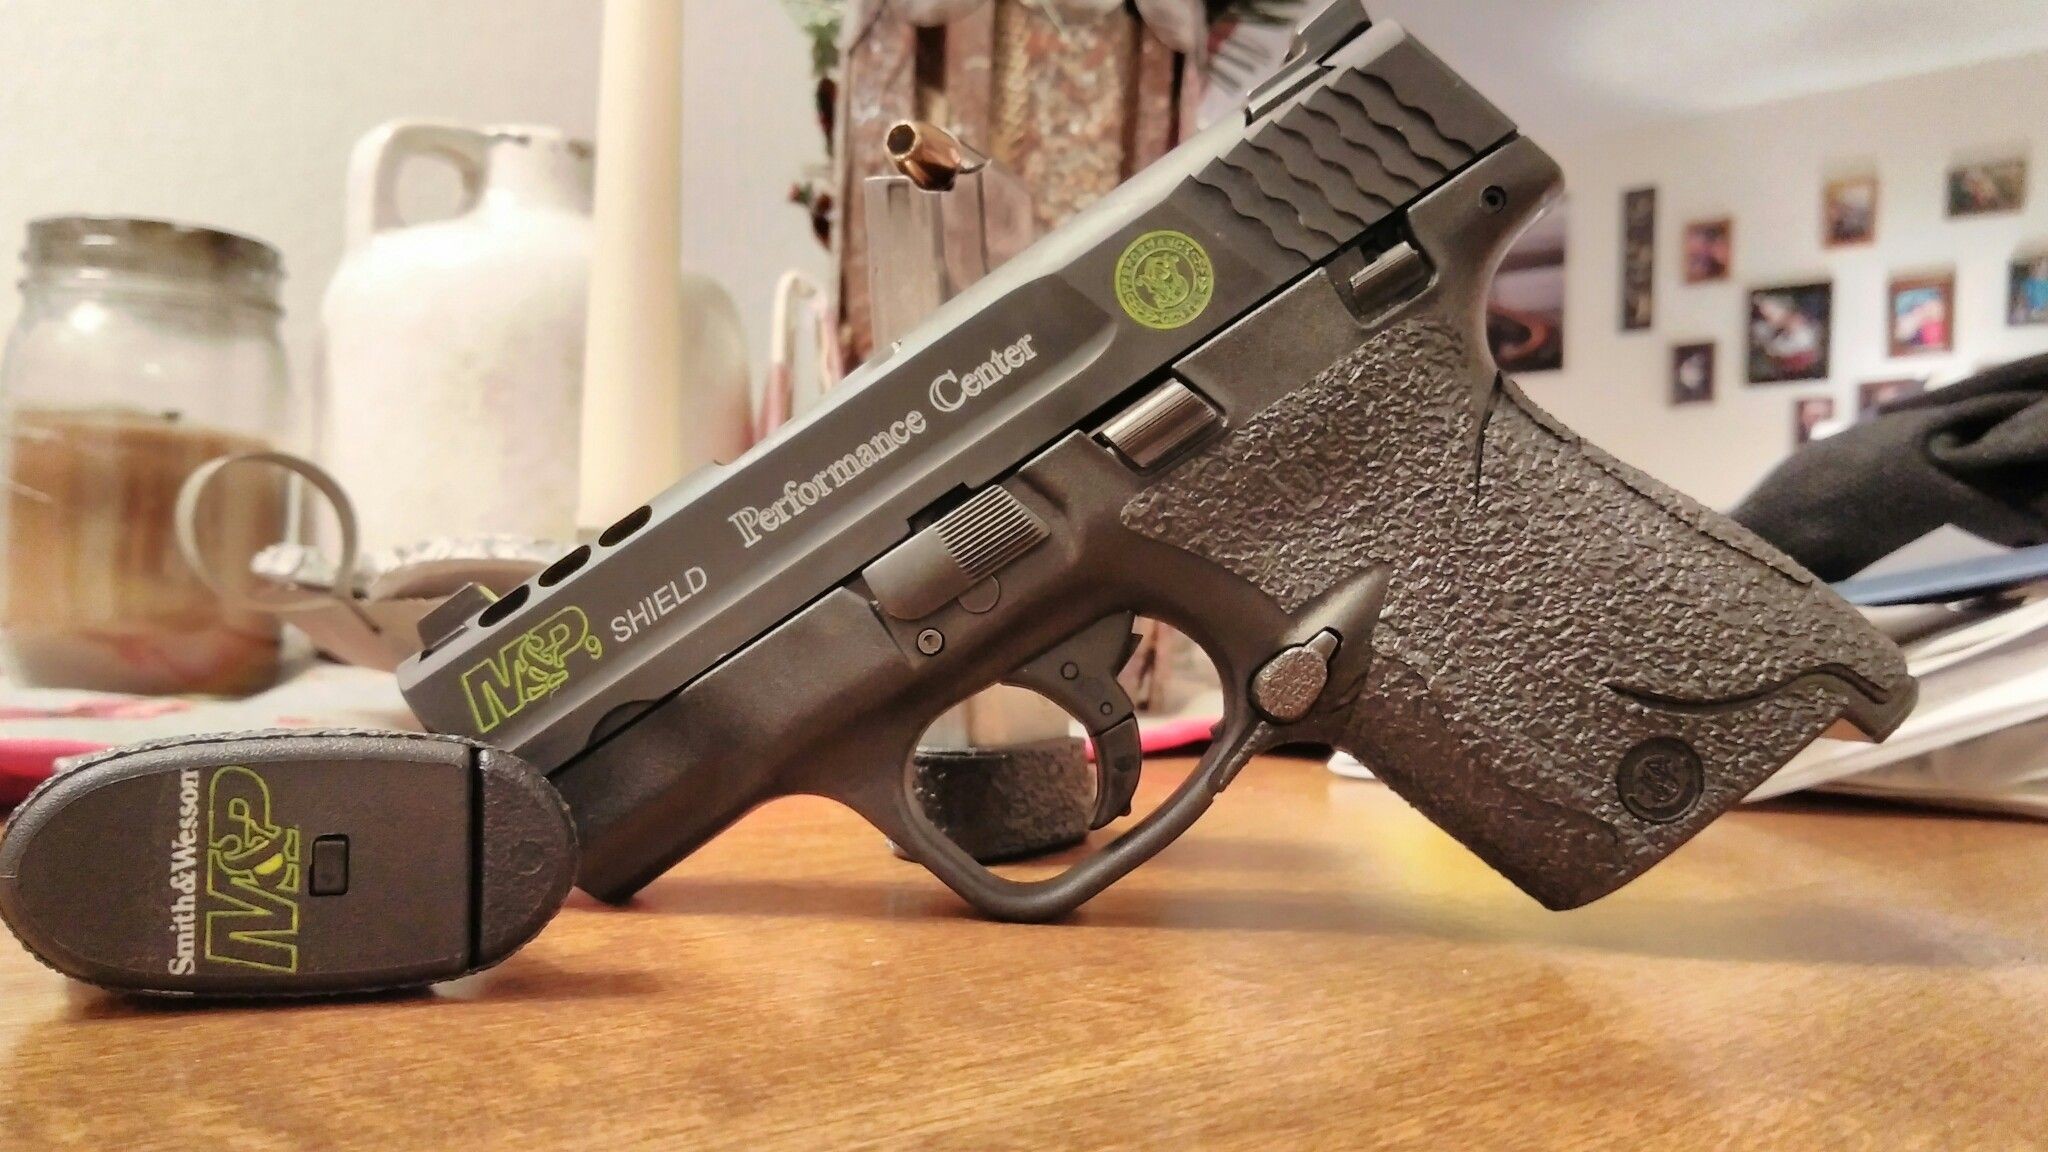 2048x1152 My M&P Performance Center Shield 9mm, with Trijicon HD night sights, Talon  grip, and color filled with a zombie theme.